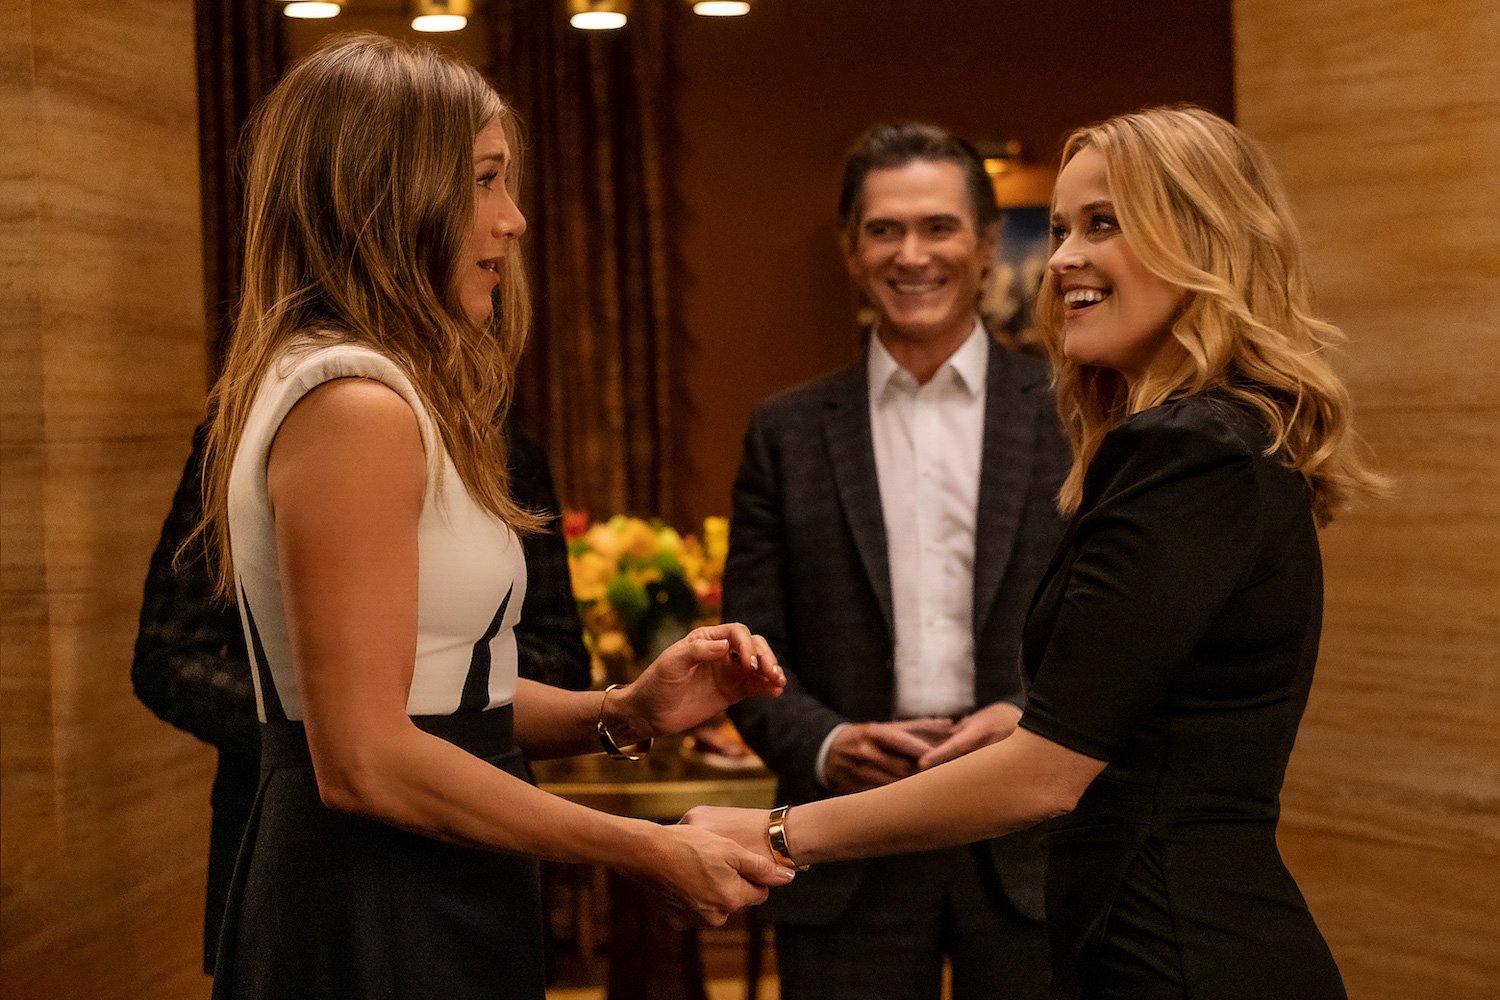 Jennifer Aniston and Reese Witherspoon hold hands as Billy Crudup smiles in 'The Morning Show' Season 2 Episode 2 'It's Like the Flu'